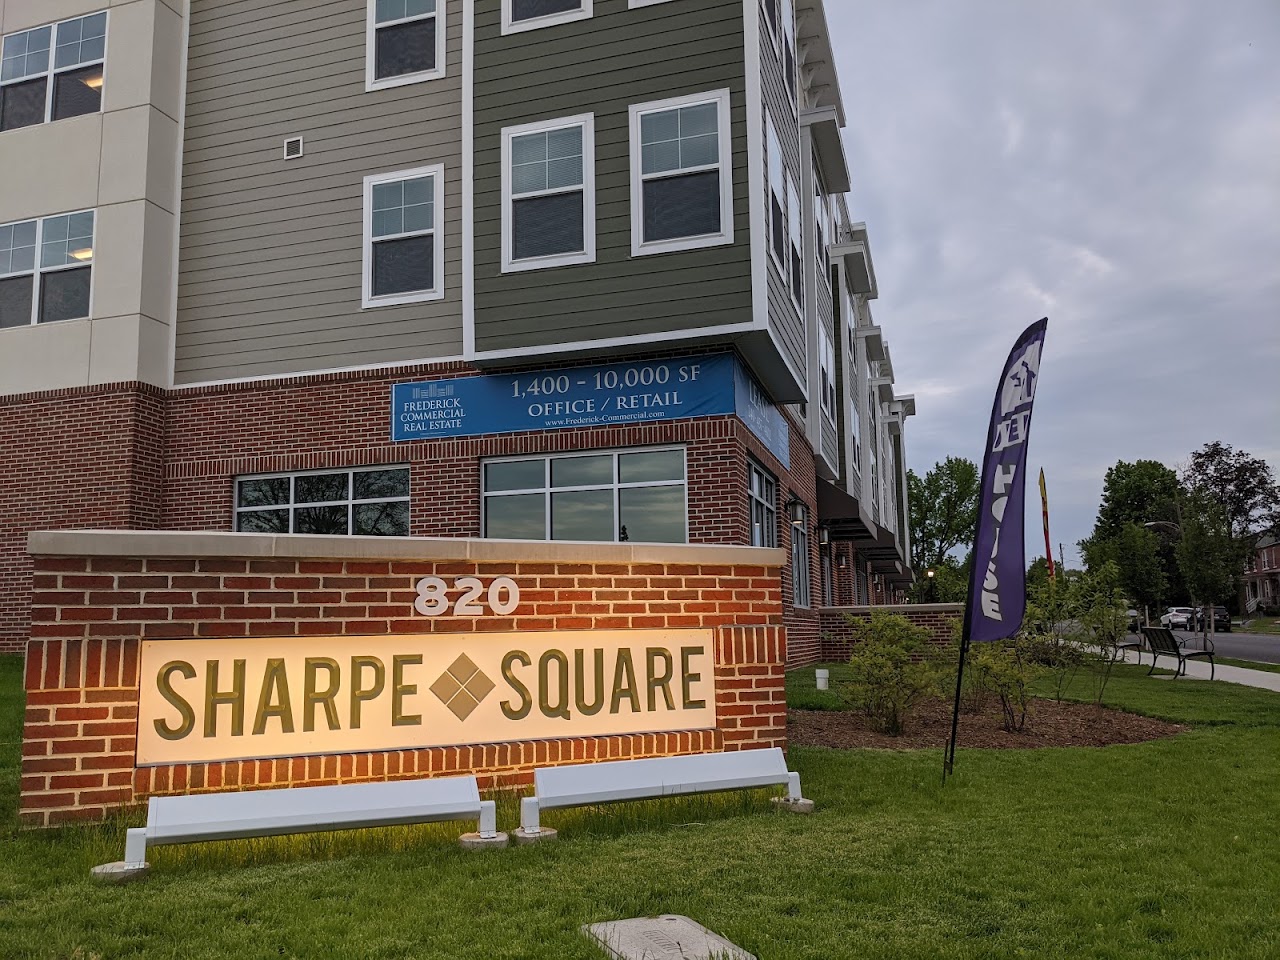 Photo of SHARPE SQUARE. Affordable housing located at 820 MOTTER AVENUE FREDERICK, MD 21701